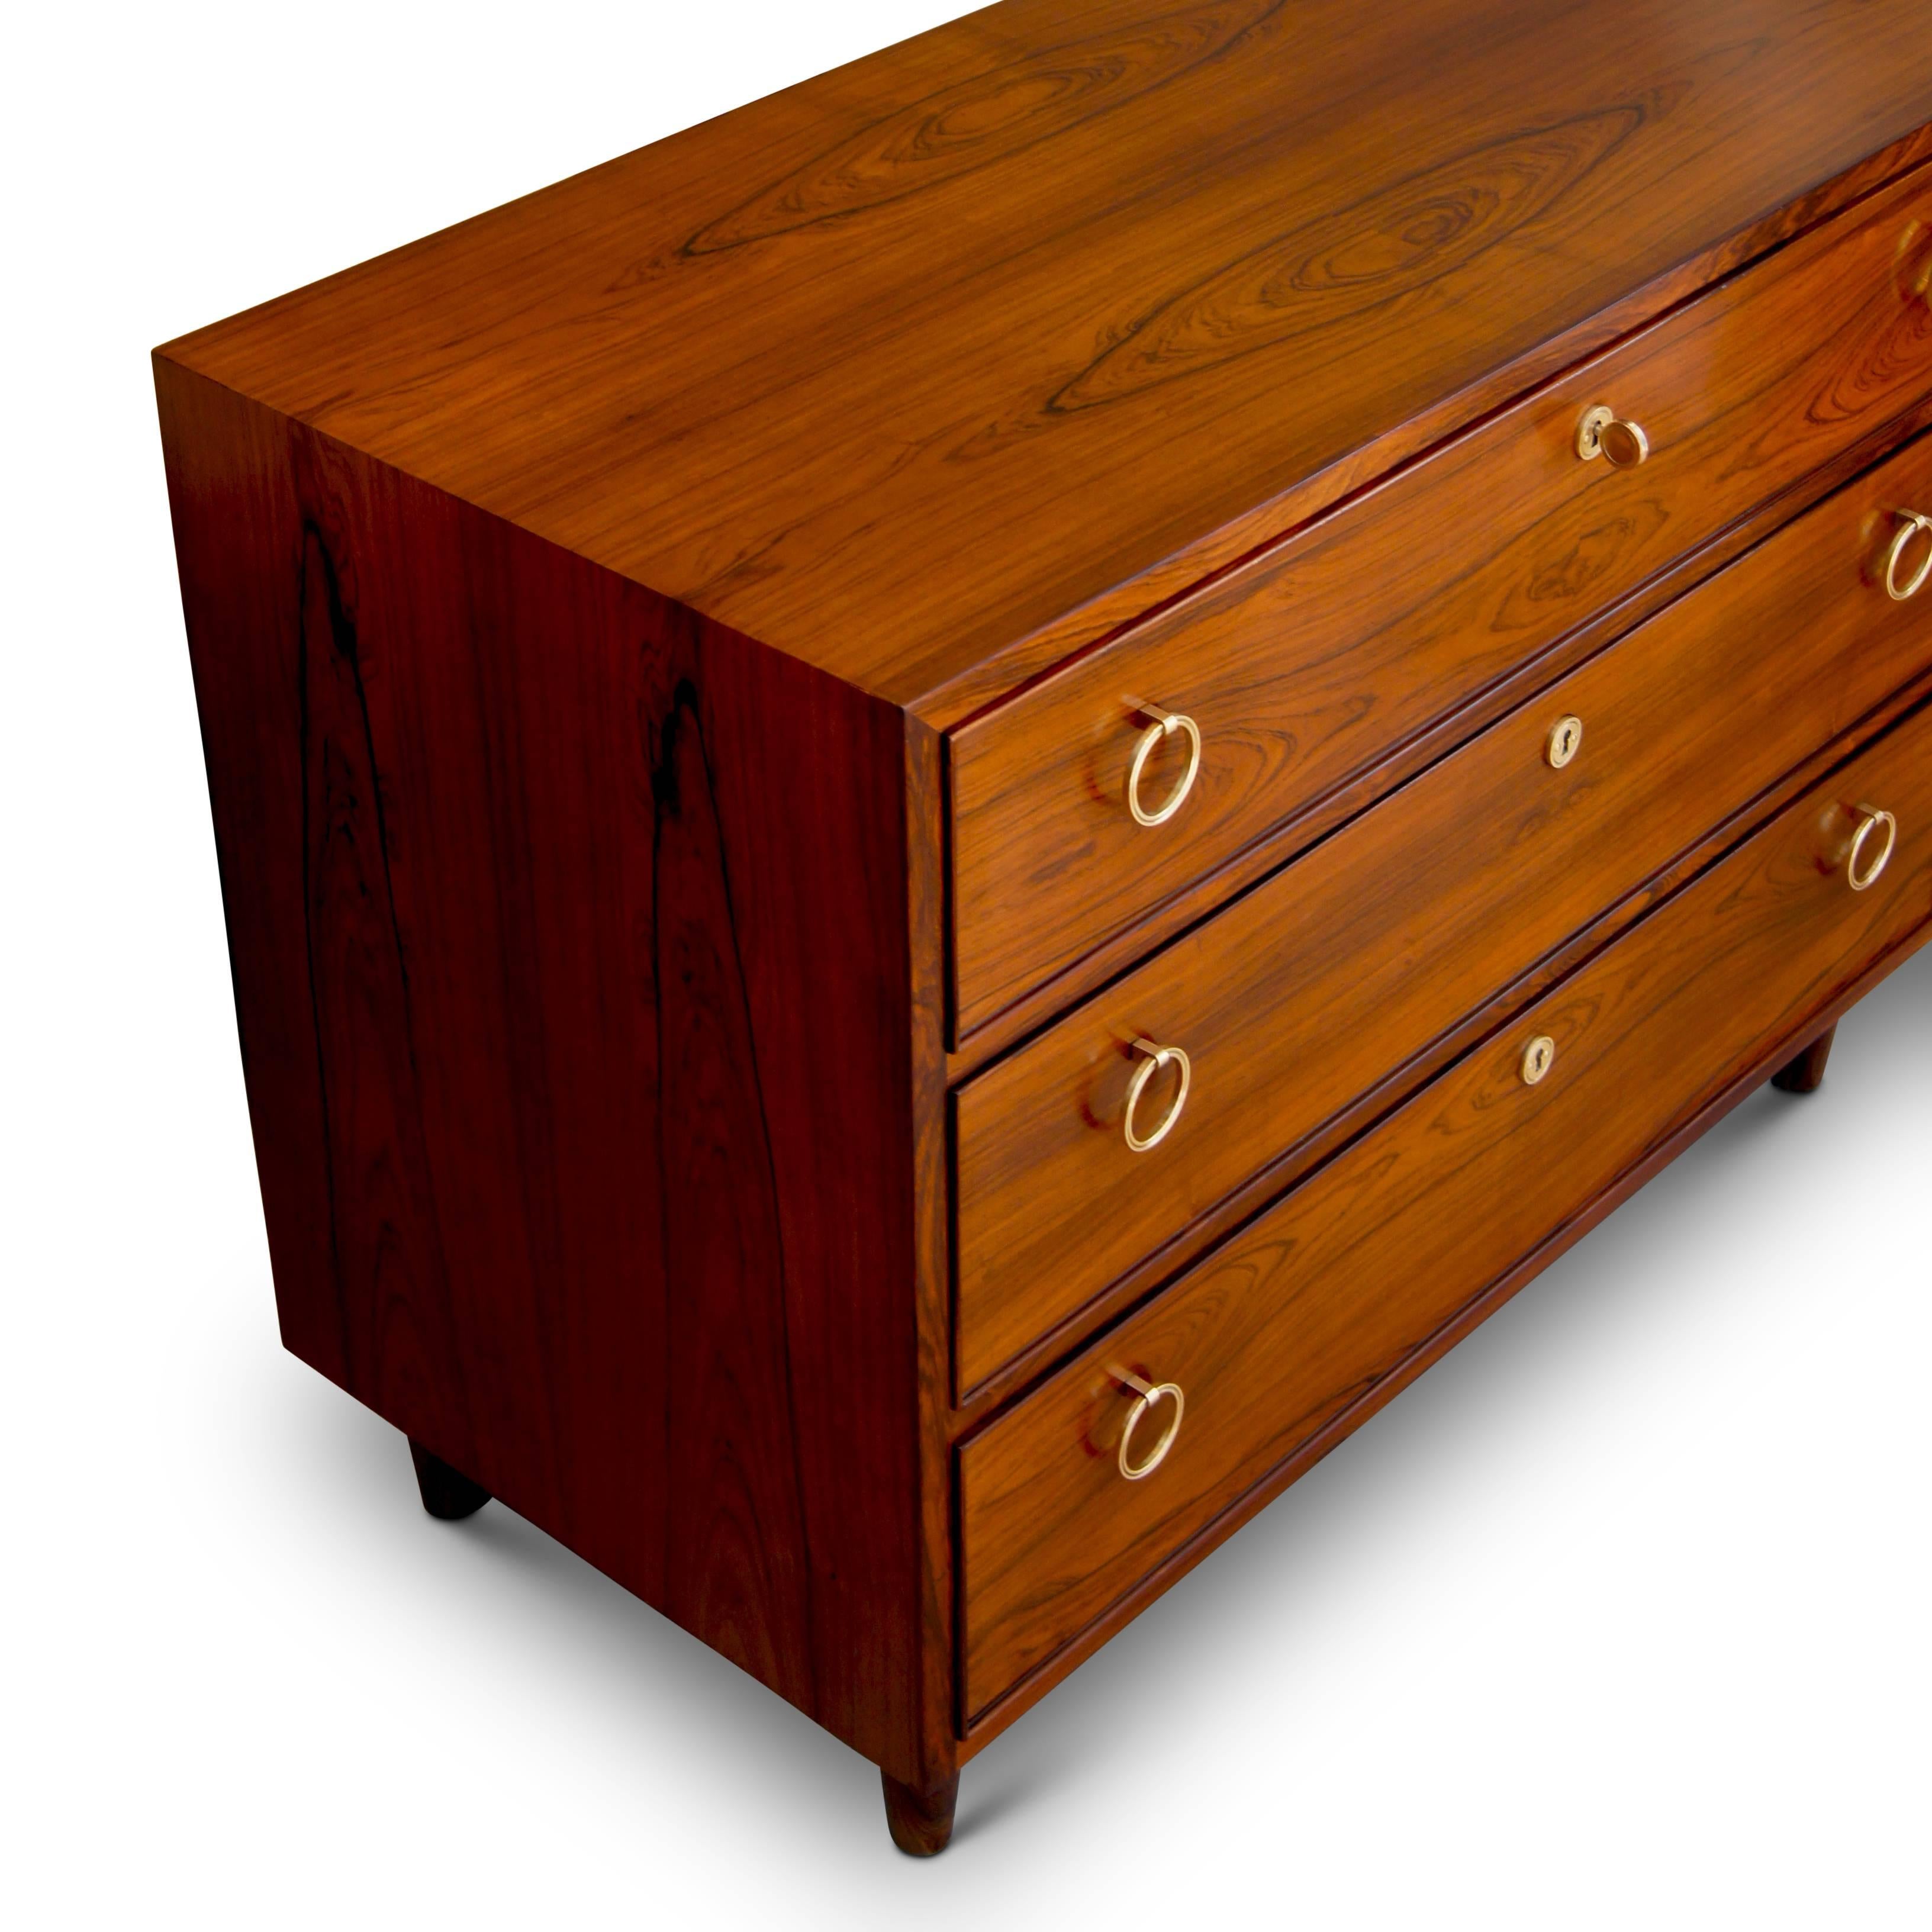 Extraordinary chest of drawers designed by architect and furniture designer Ernst Kuhn (1890-1948), using very handsome cuts of graphically figured wood, possibly walnut, and having  three drawers articulated in bead molding and double brass ring